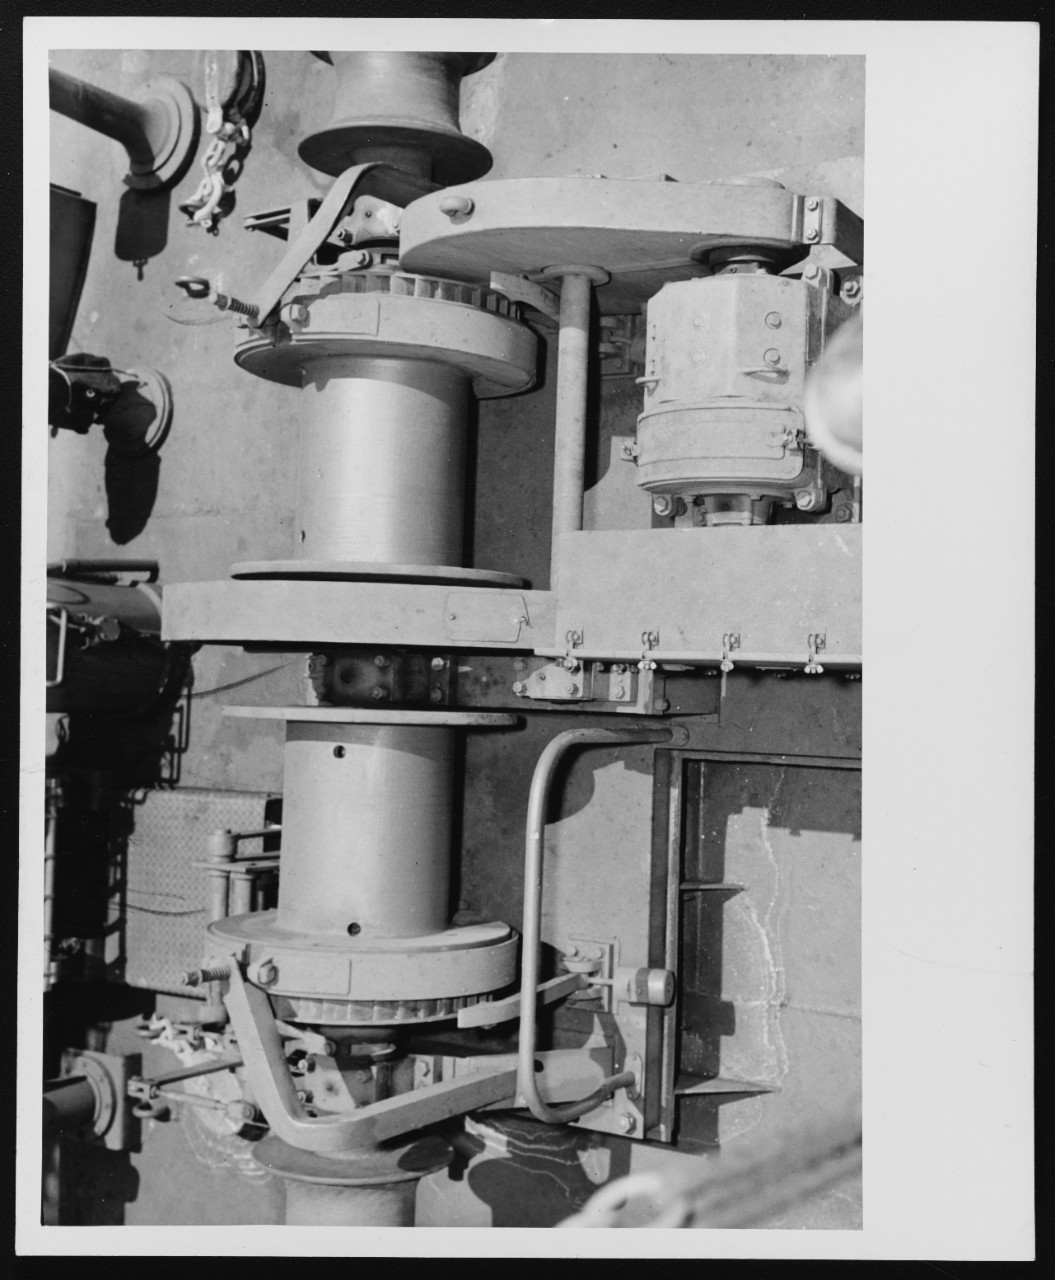 Deck winch aboard a CHIMO (ACM-1) class auxiliary minelayer, 1945